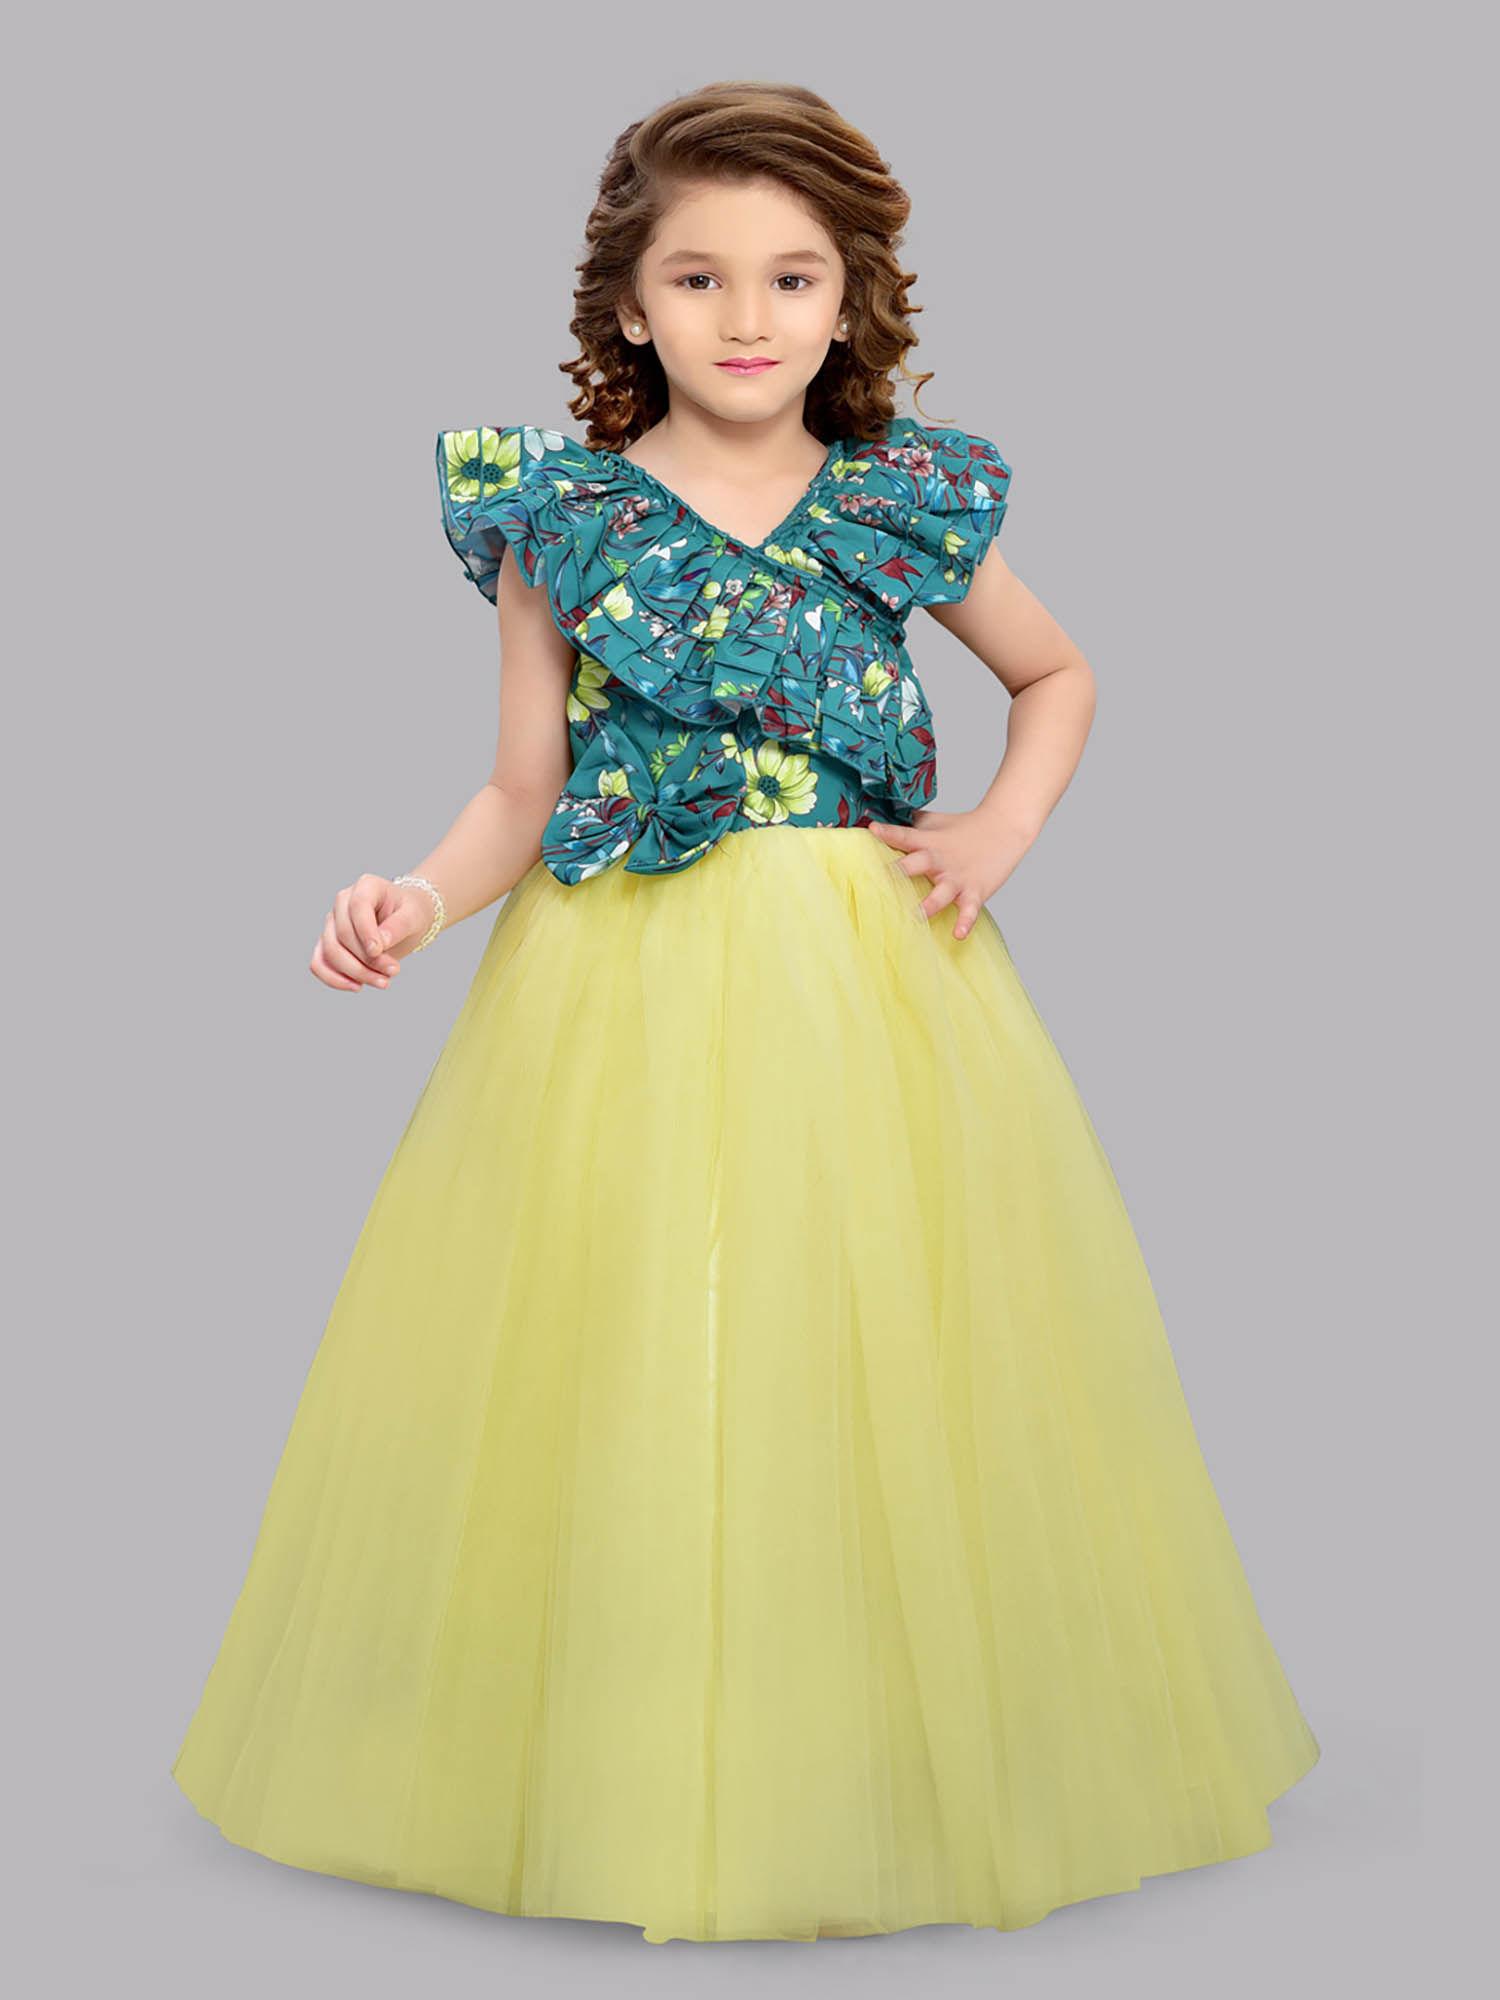 floral green bodice and yellow tulle gown